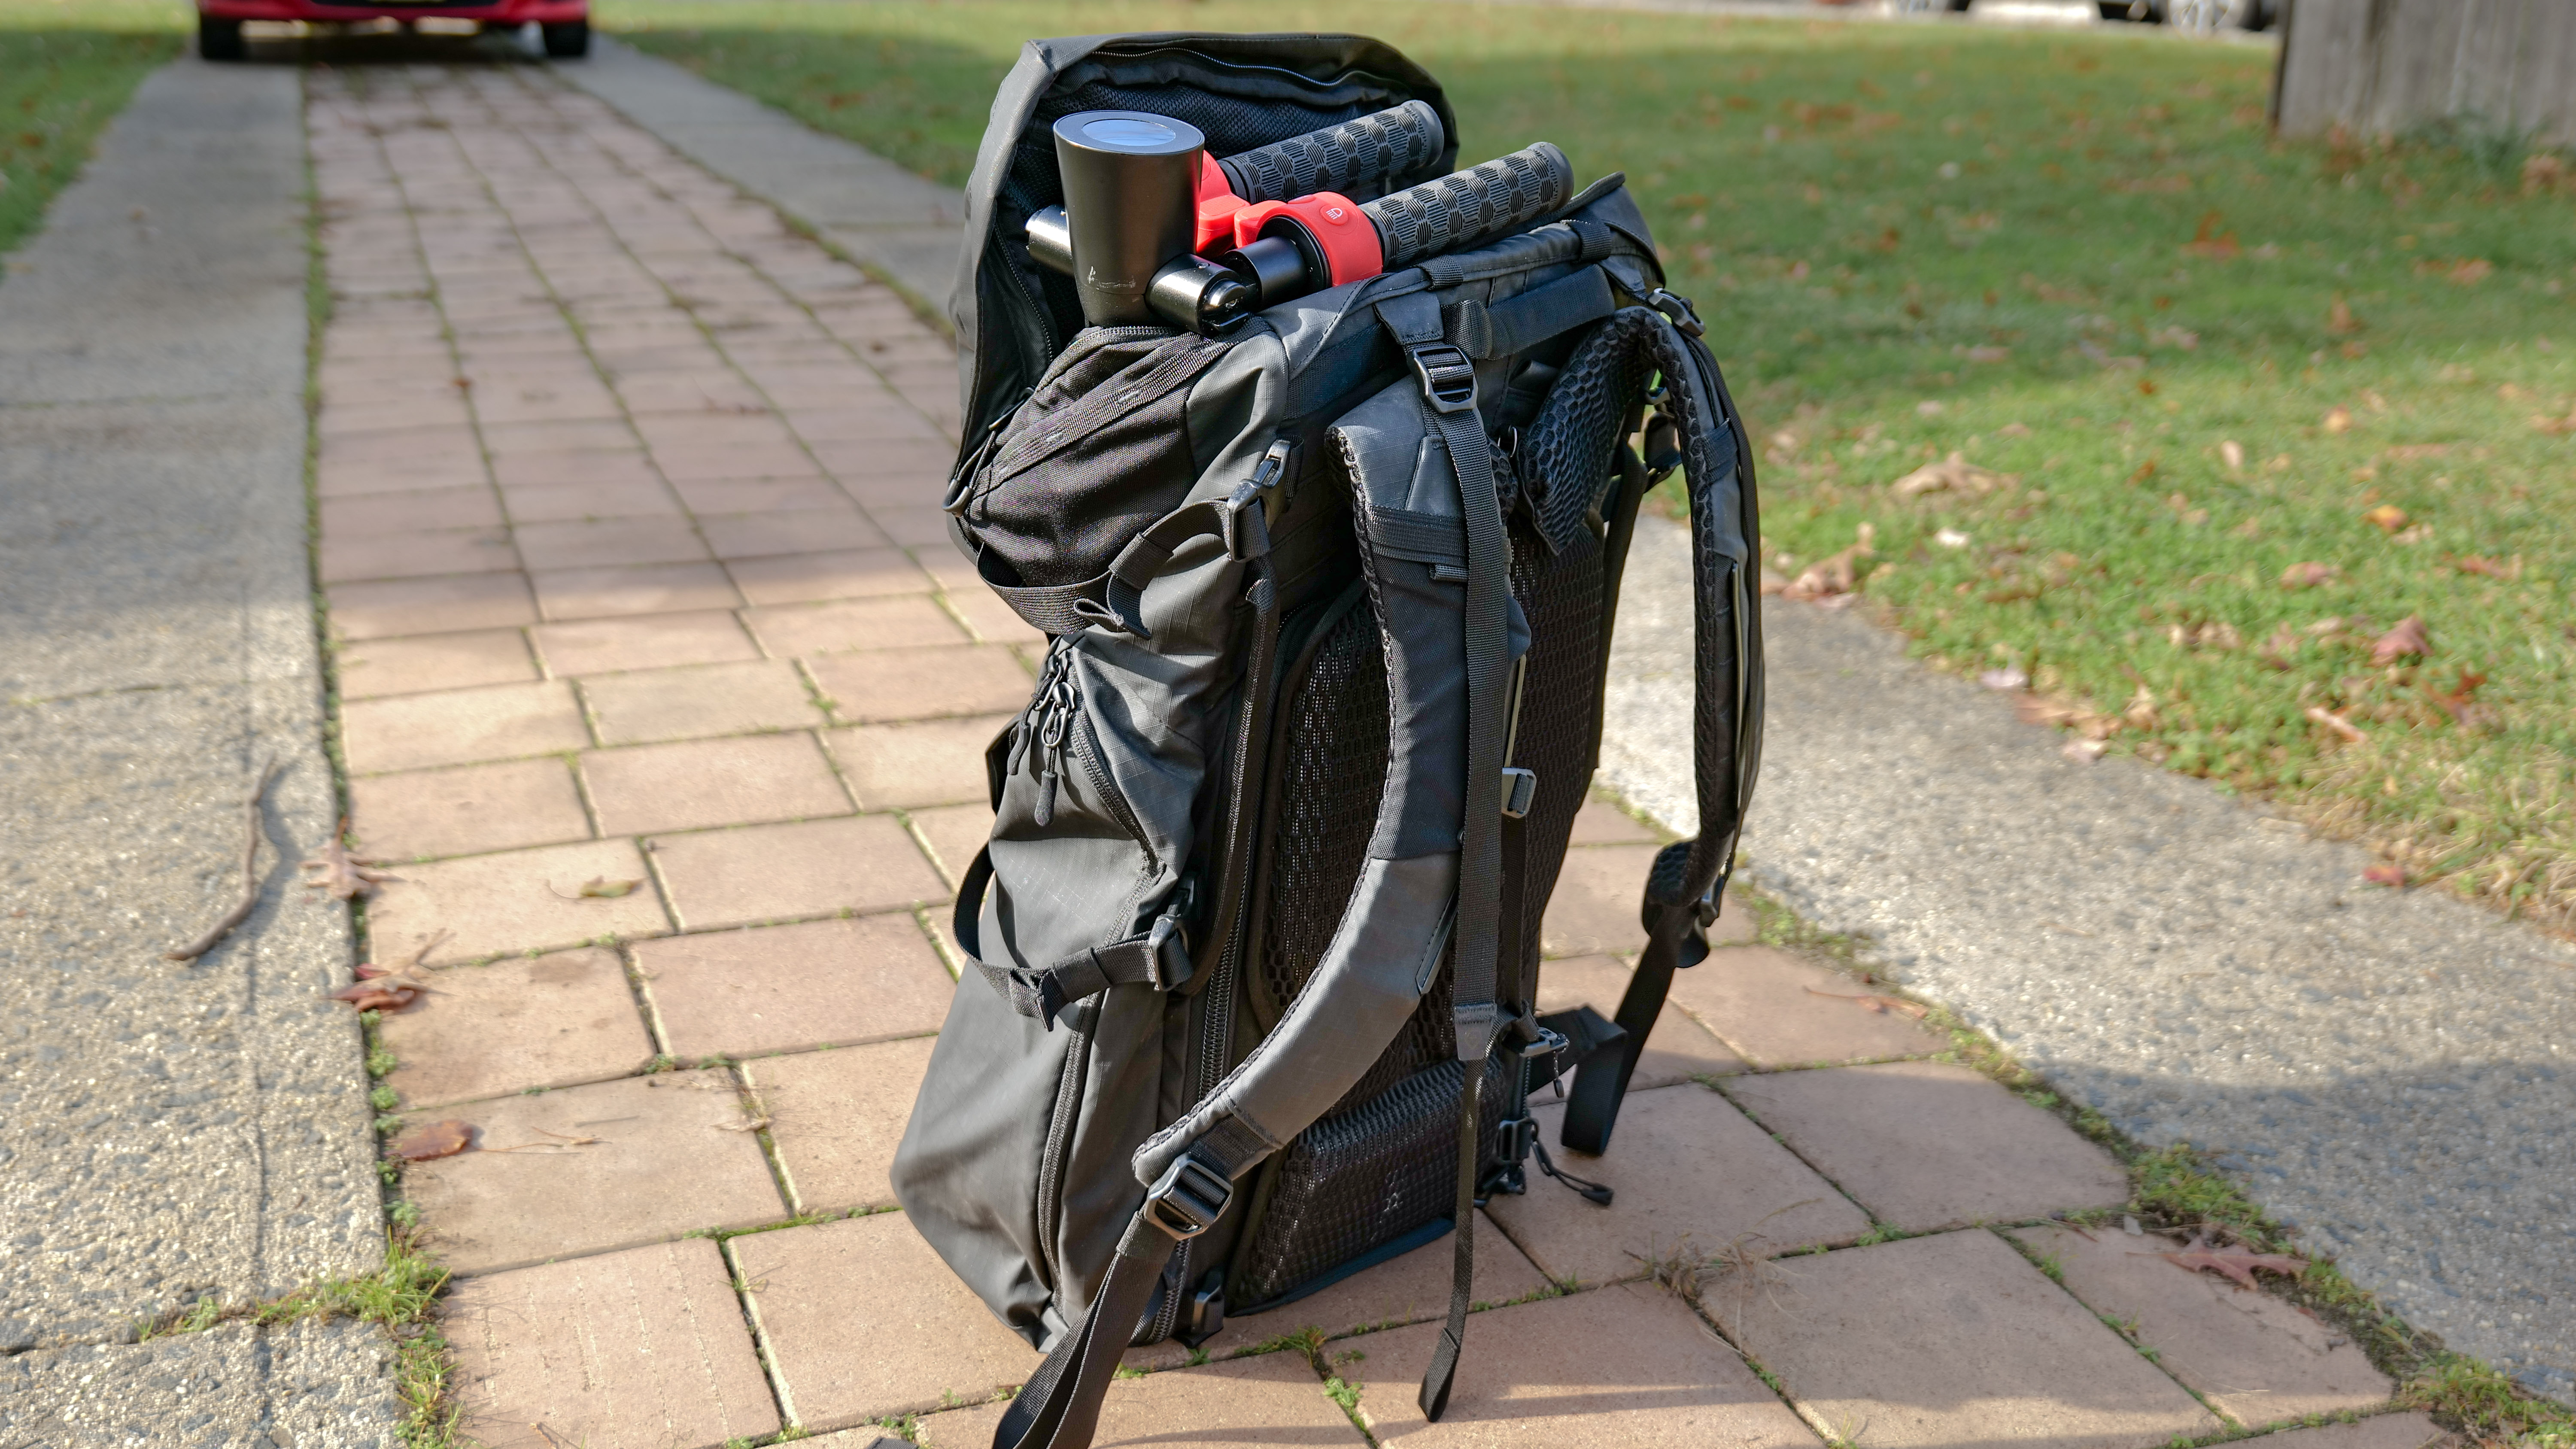 Dynamic Scooter Model B folding scooter fits in backpack.